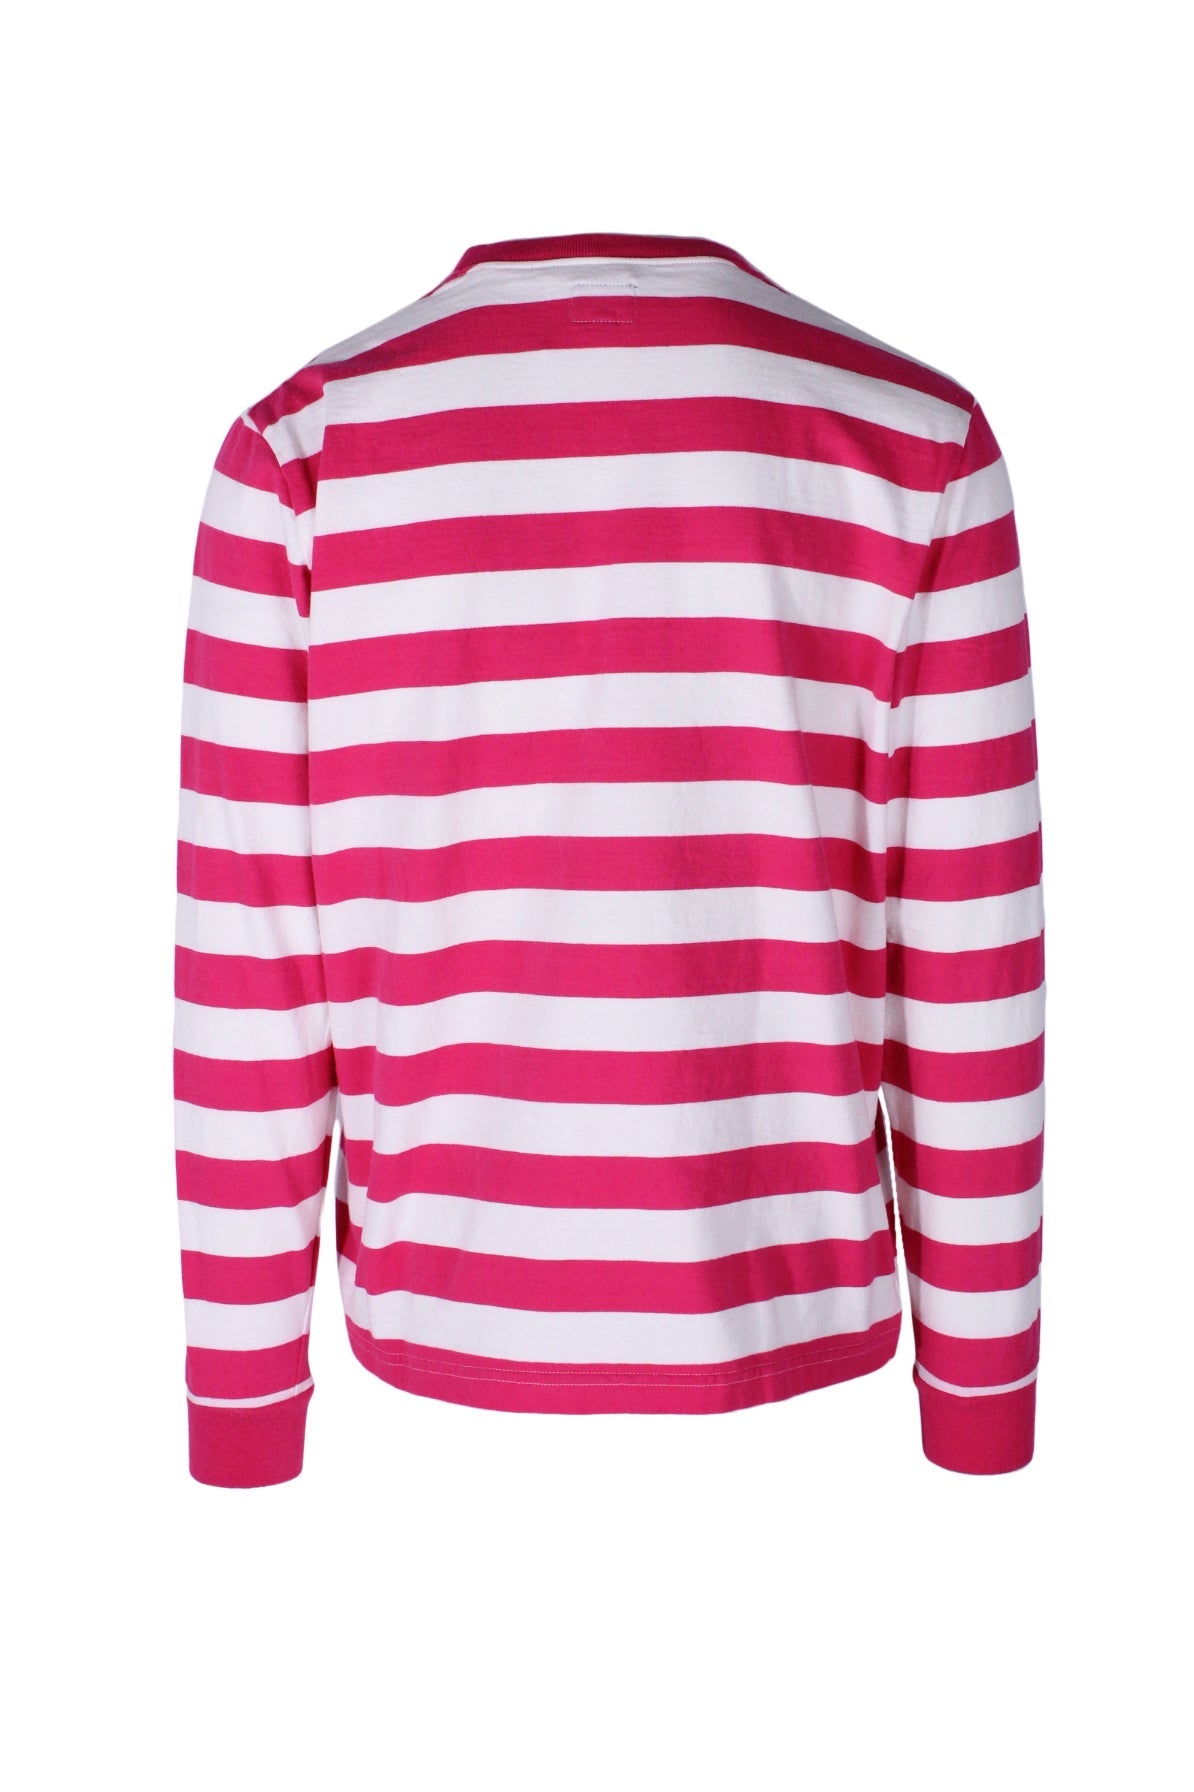 back angle noah dark pink and white long sleeve striped t-shirt on masculine mannequin torso.